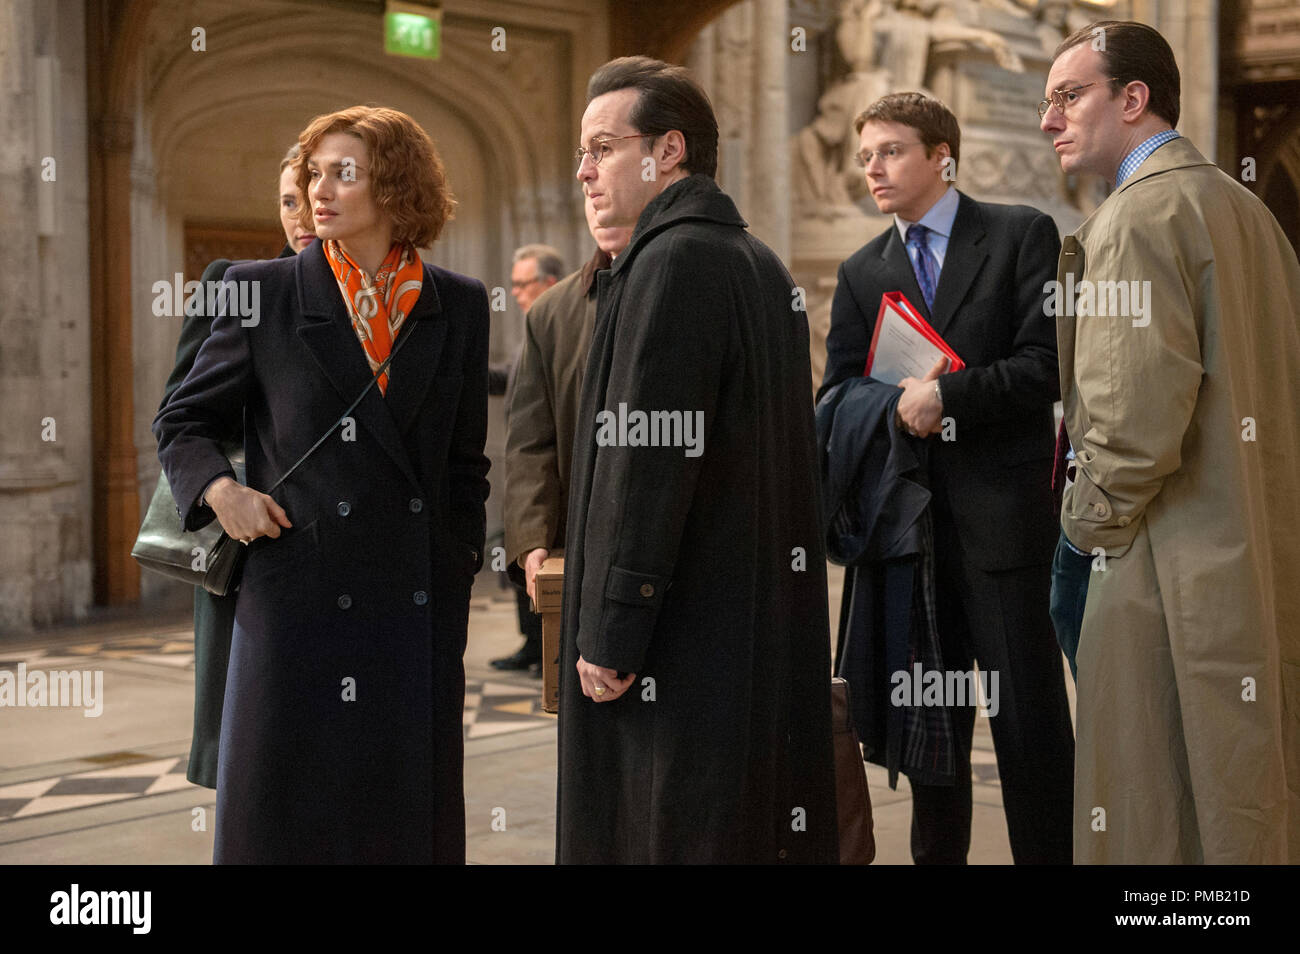 (l to r) Rachel Weisz stars as acclaimed writer and historian Deborah E. Lipstadt, Andrew Scott as Anthony Julius, Jack Lowden as James Lisbon and Pip Carter as Forbes Watson in DENIAL, a Bleecker Street release. Stock Photo